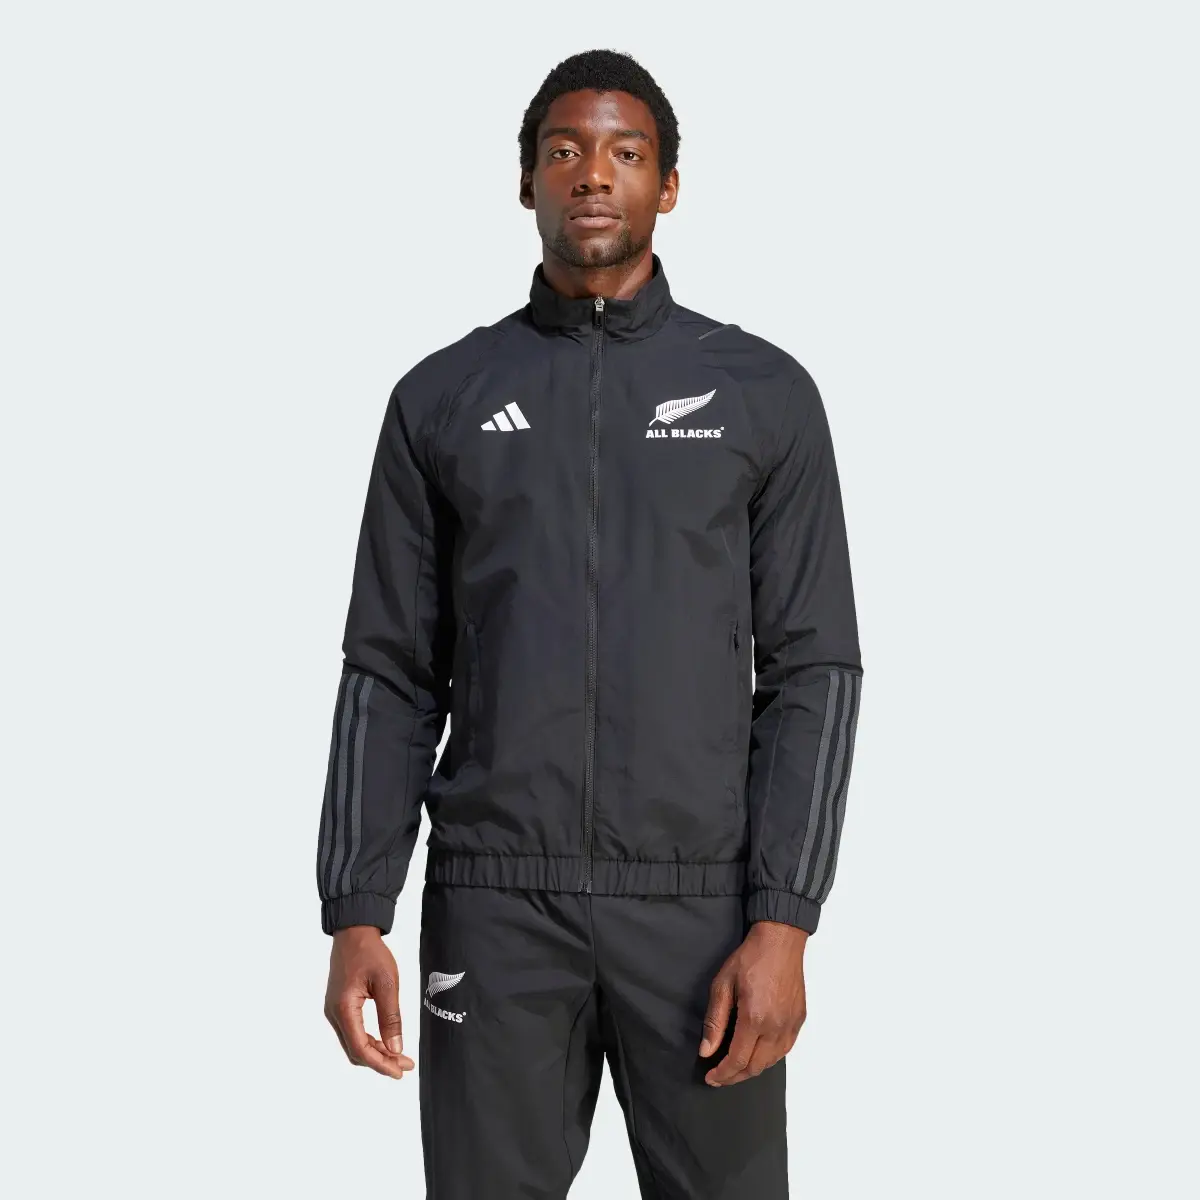 Adidas Bluza All Blacks Rugby Track Suit. 2